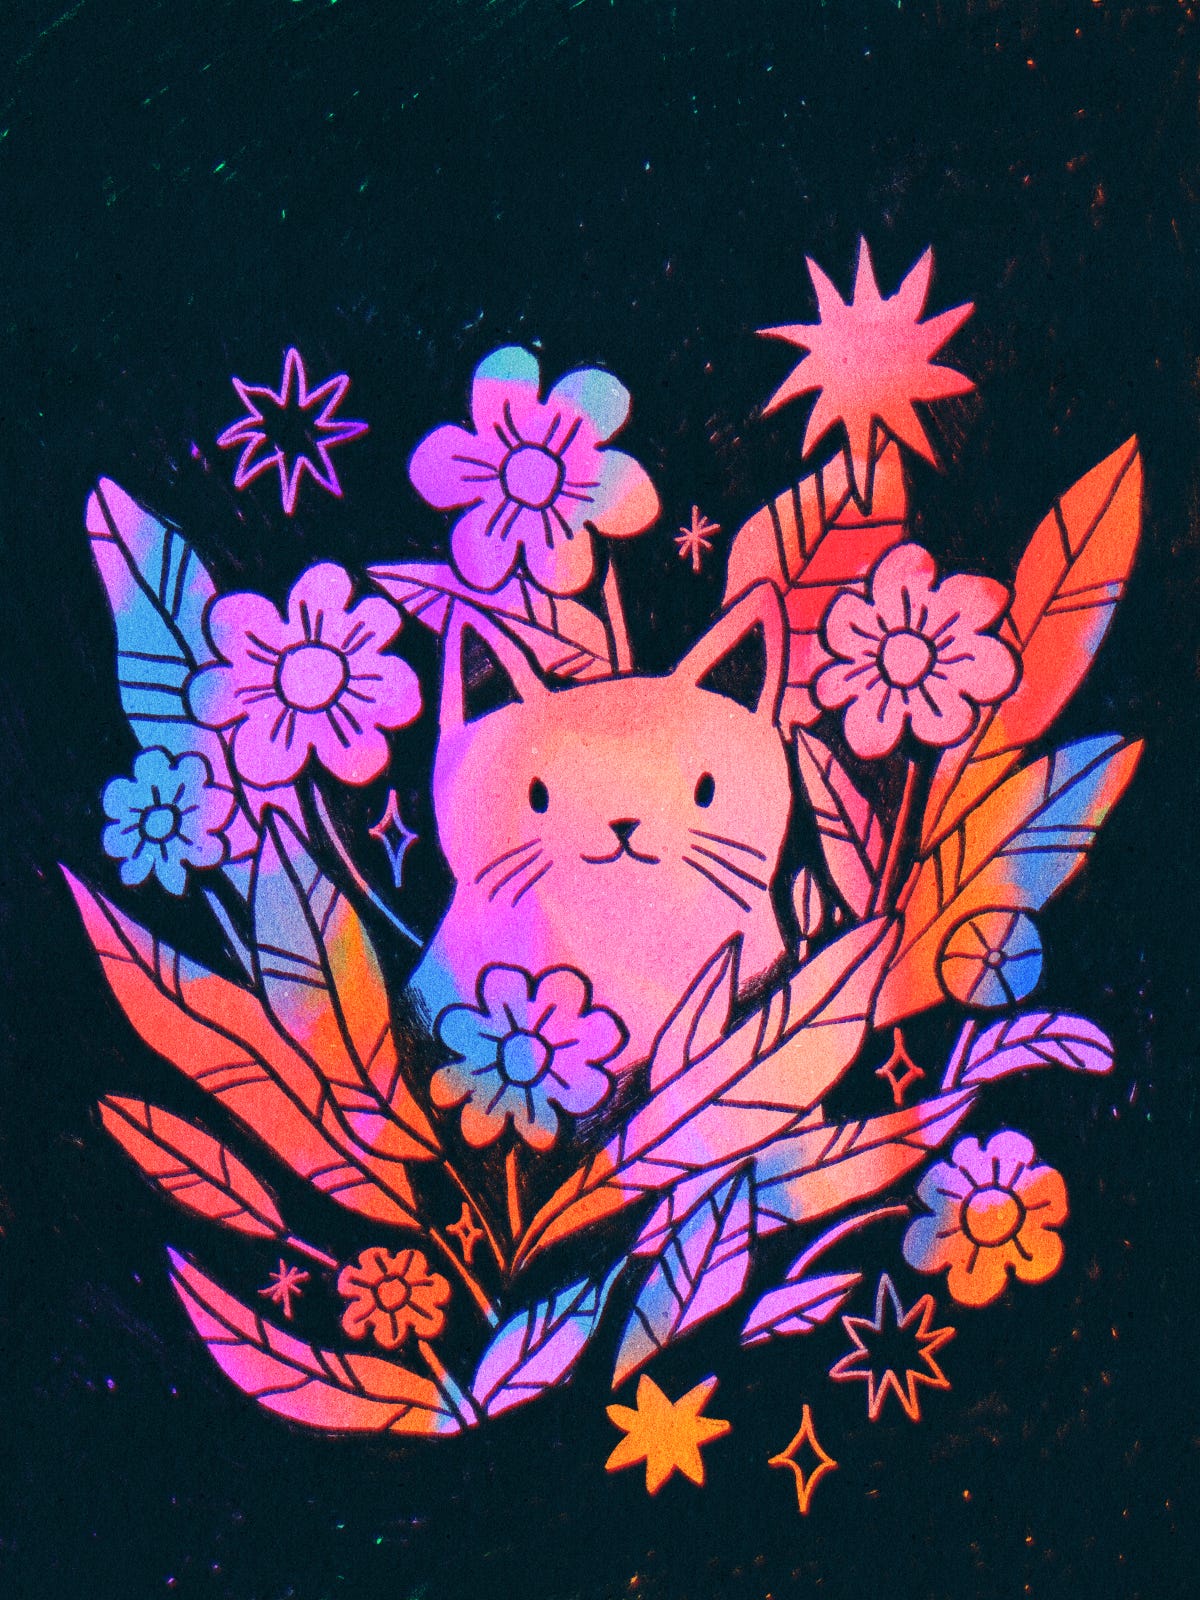 A digital drawing of a cat among some flowers against a dark background.